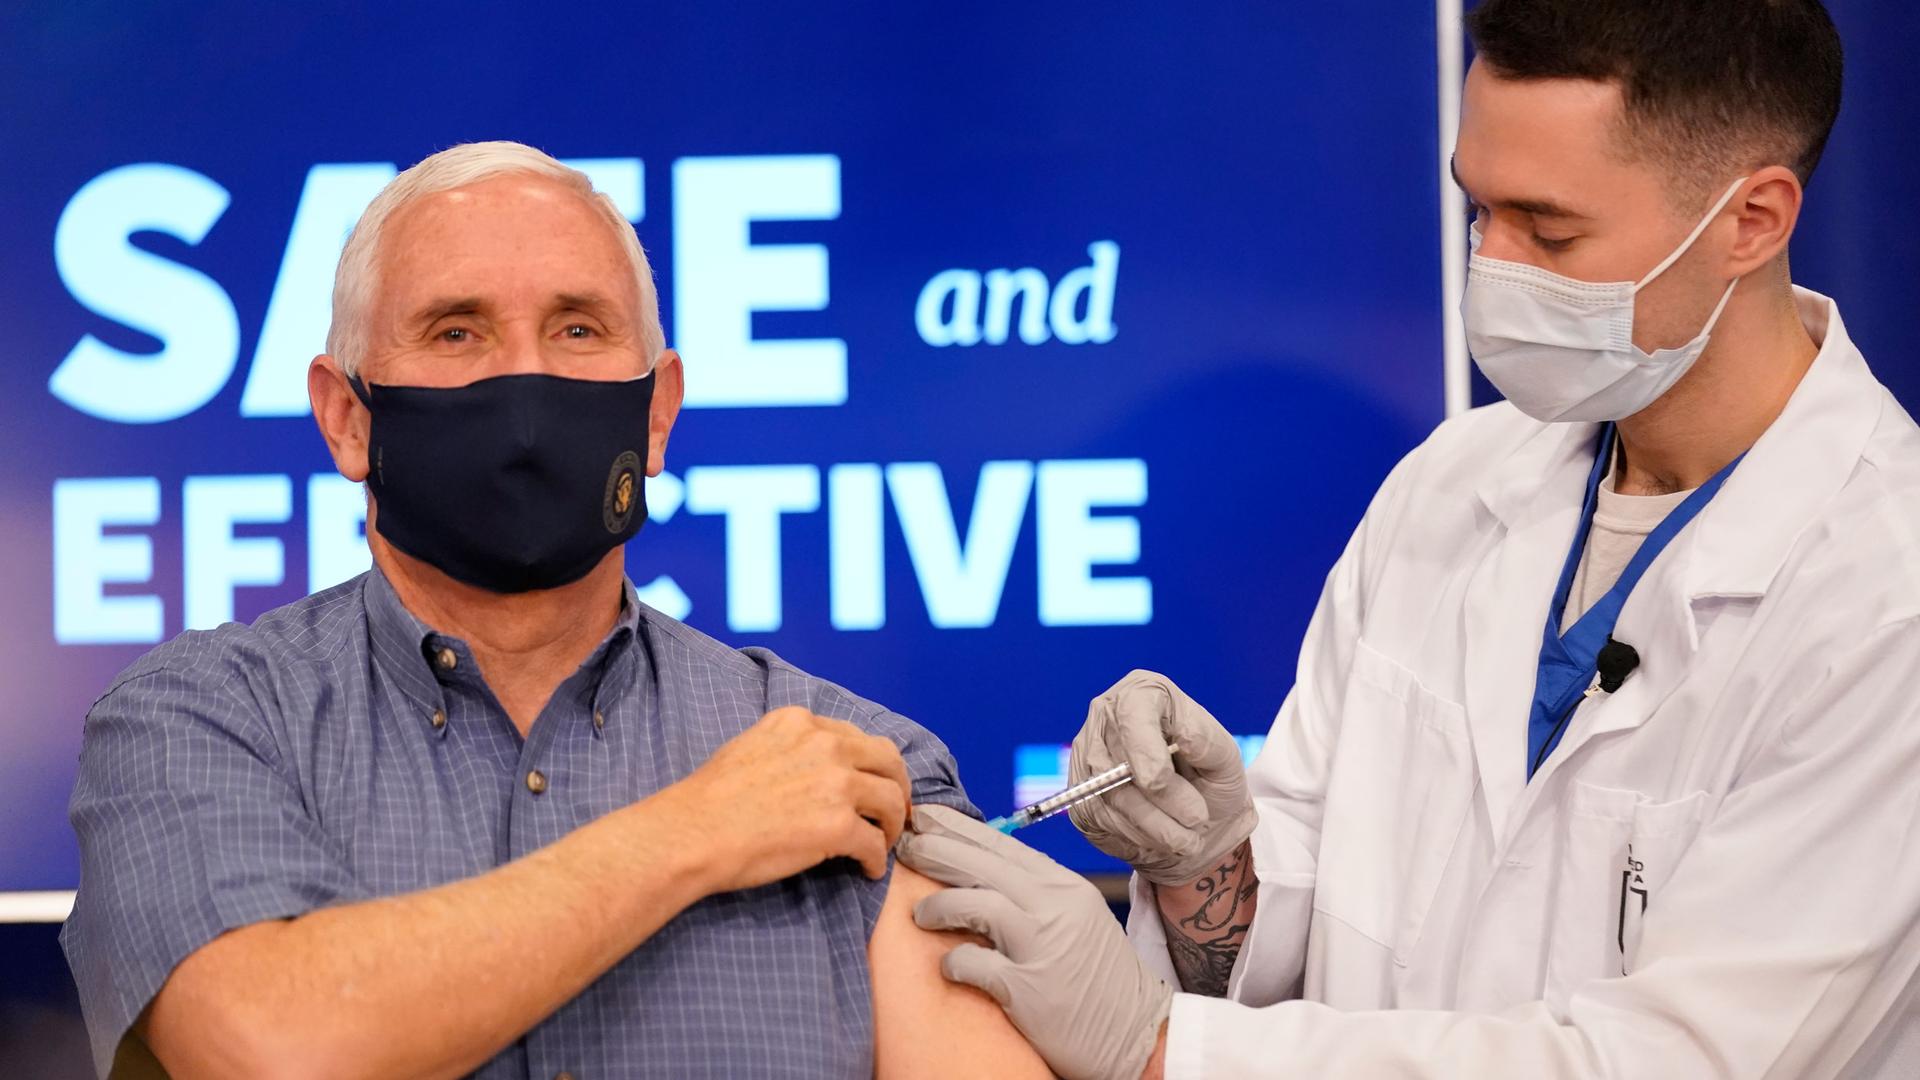 US Vice President Mike Pence is shown holding his sleeve up while a doctor injects the Pfizer-BioNTech COVID-19 vaccine shot in his shoulder.